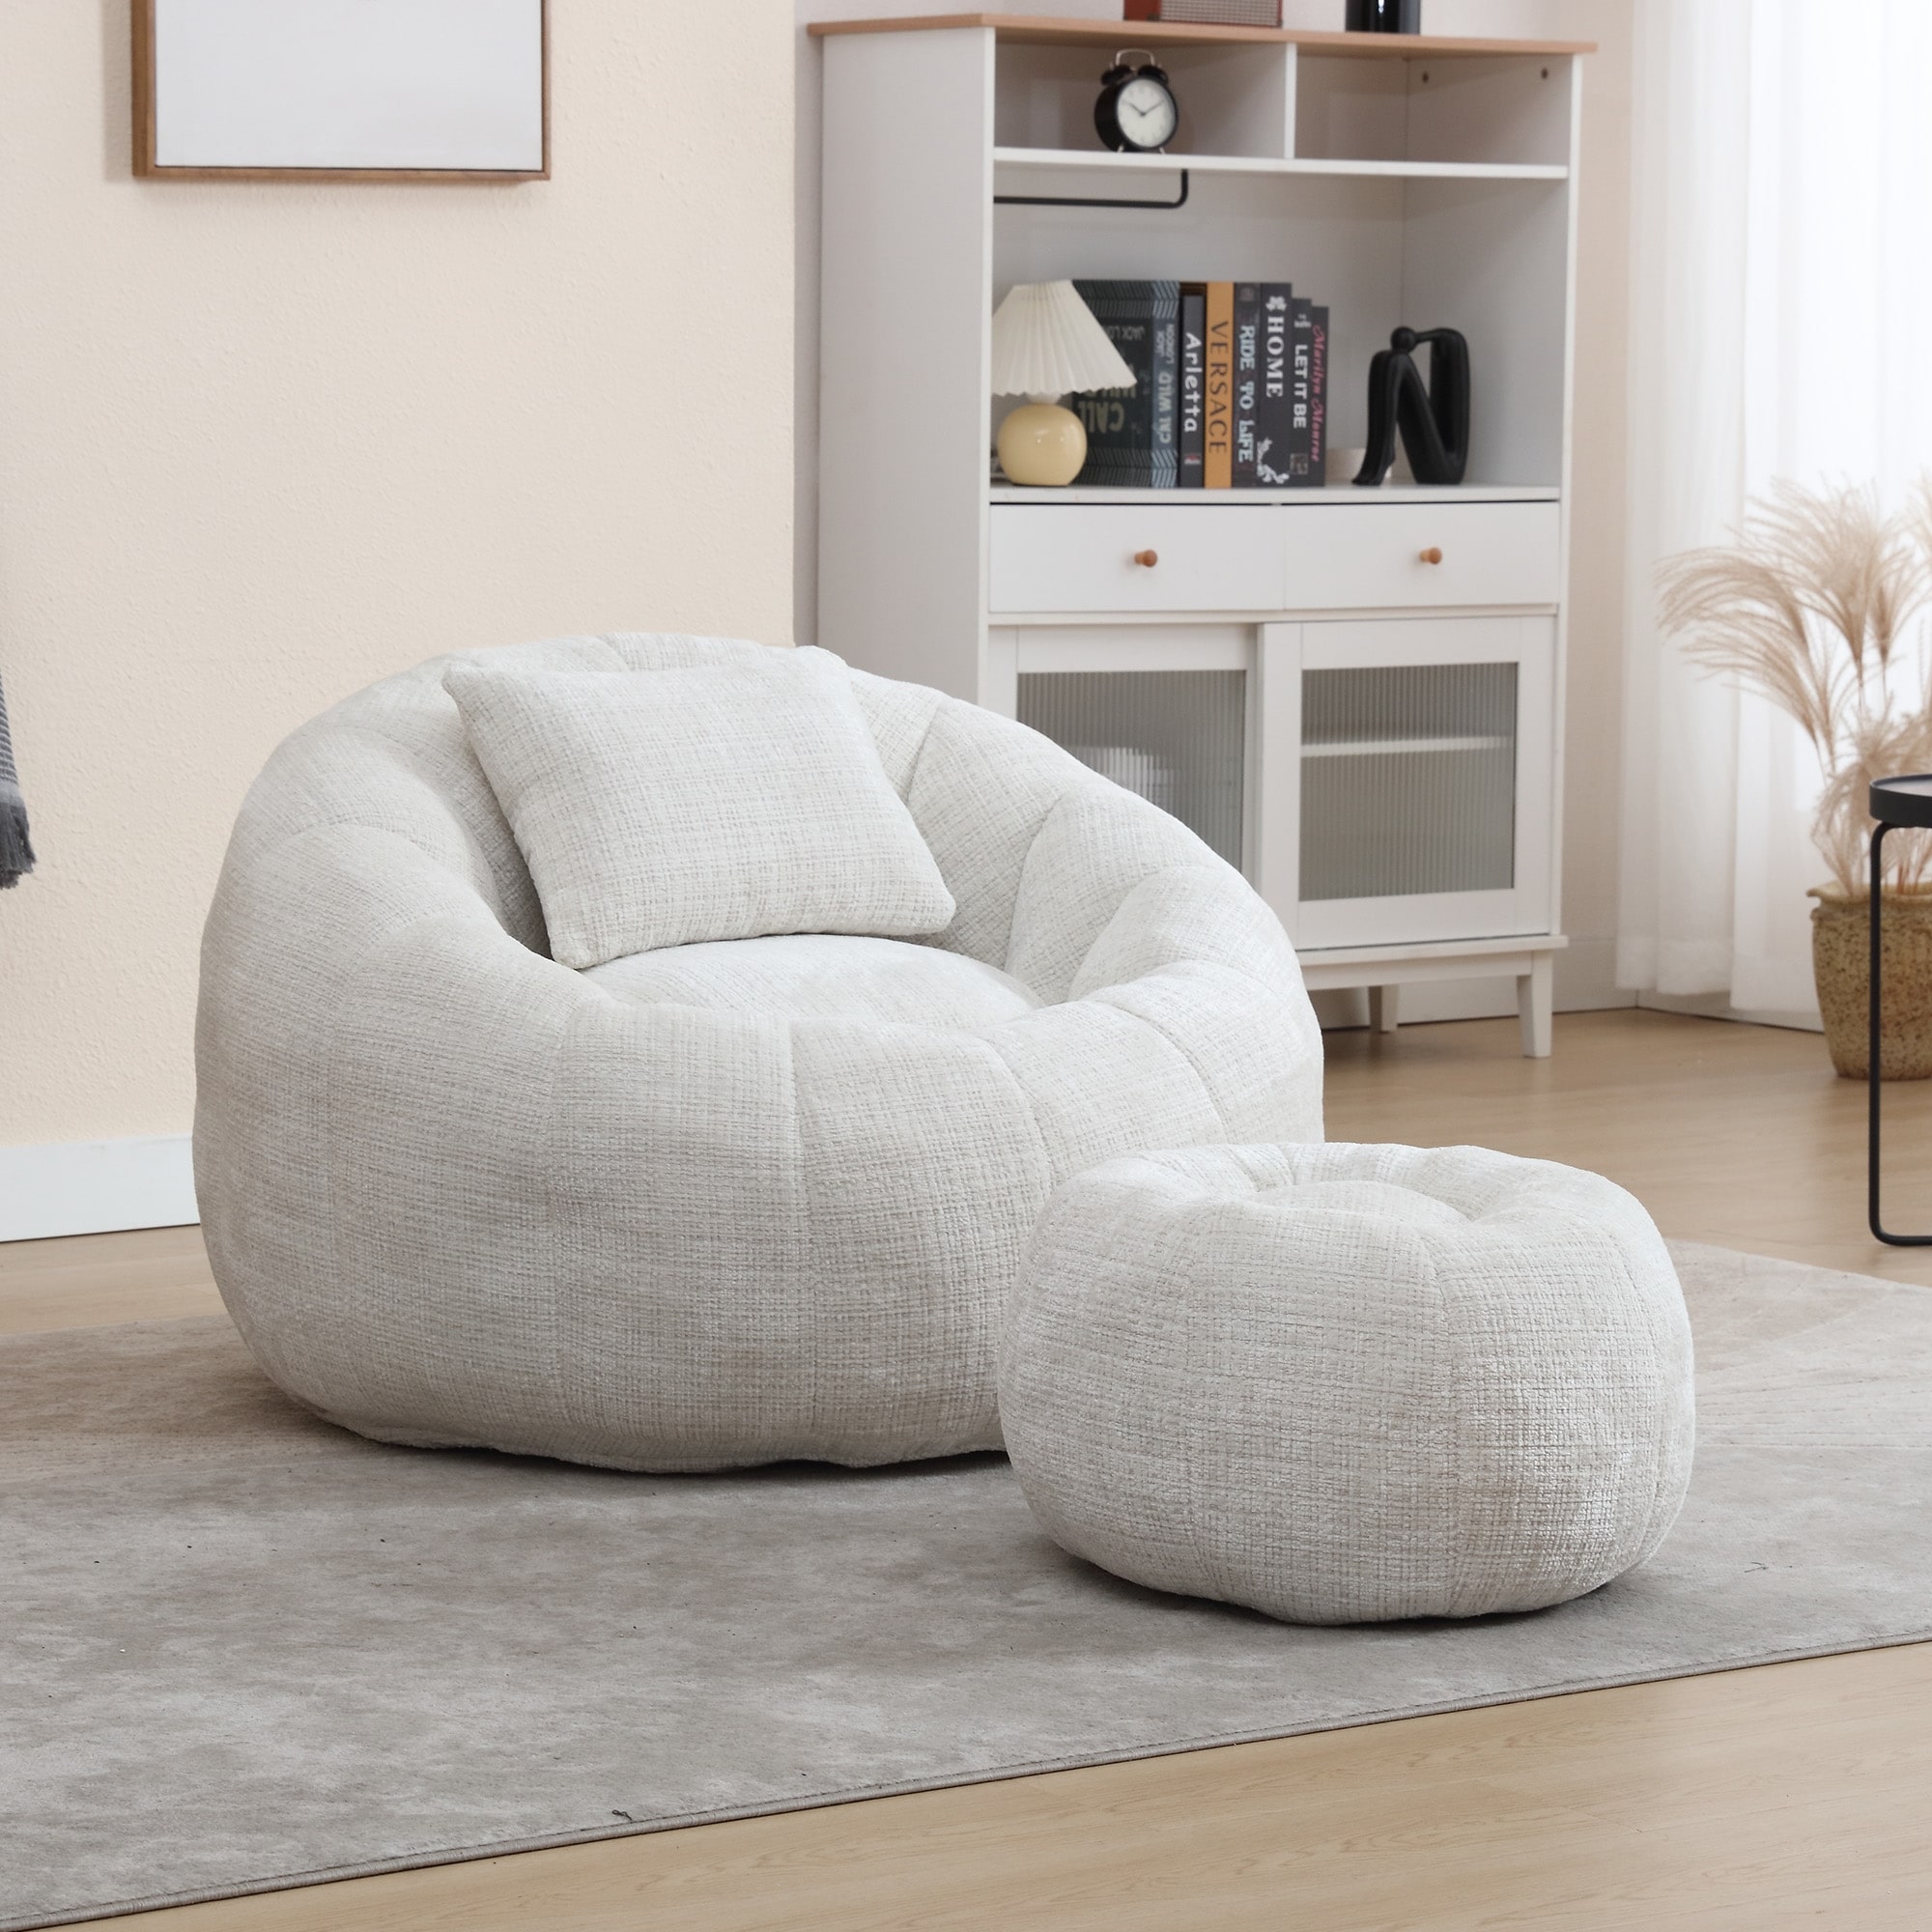 Bedding Bean Bag Sofa Chair High Pressure Foam Bean Bag Chair Adult  Material with Padded Foam Padding Compressed Bean Bag With Footrest